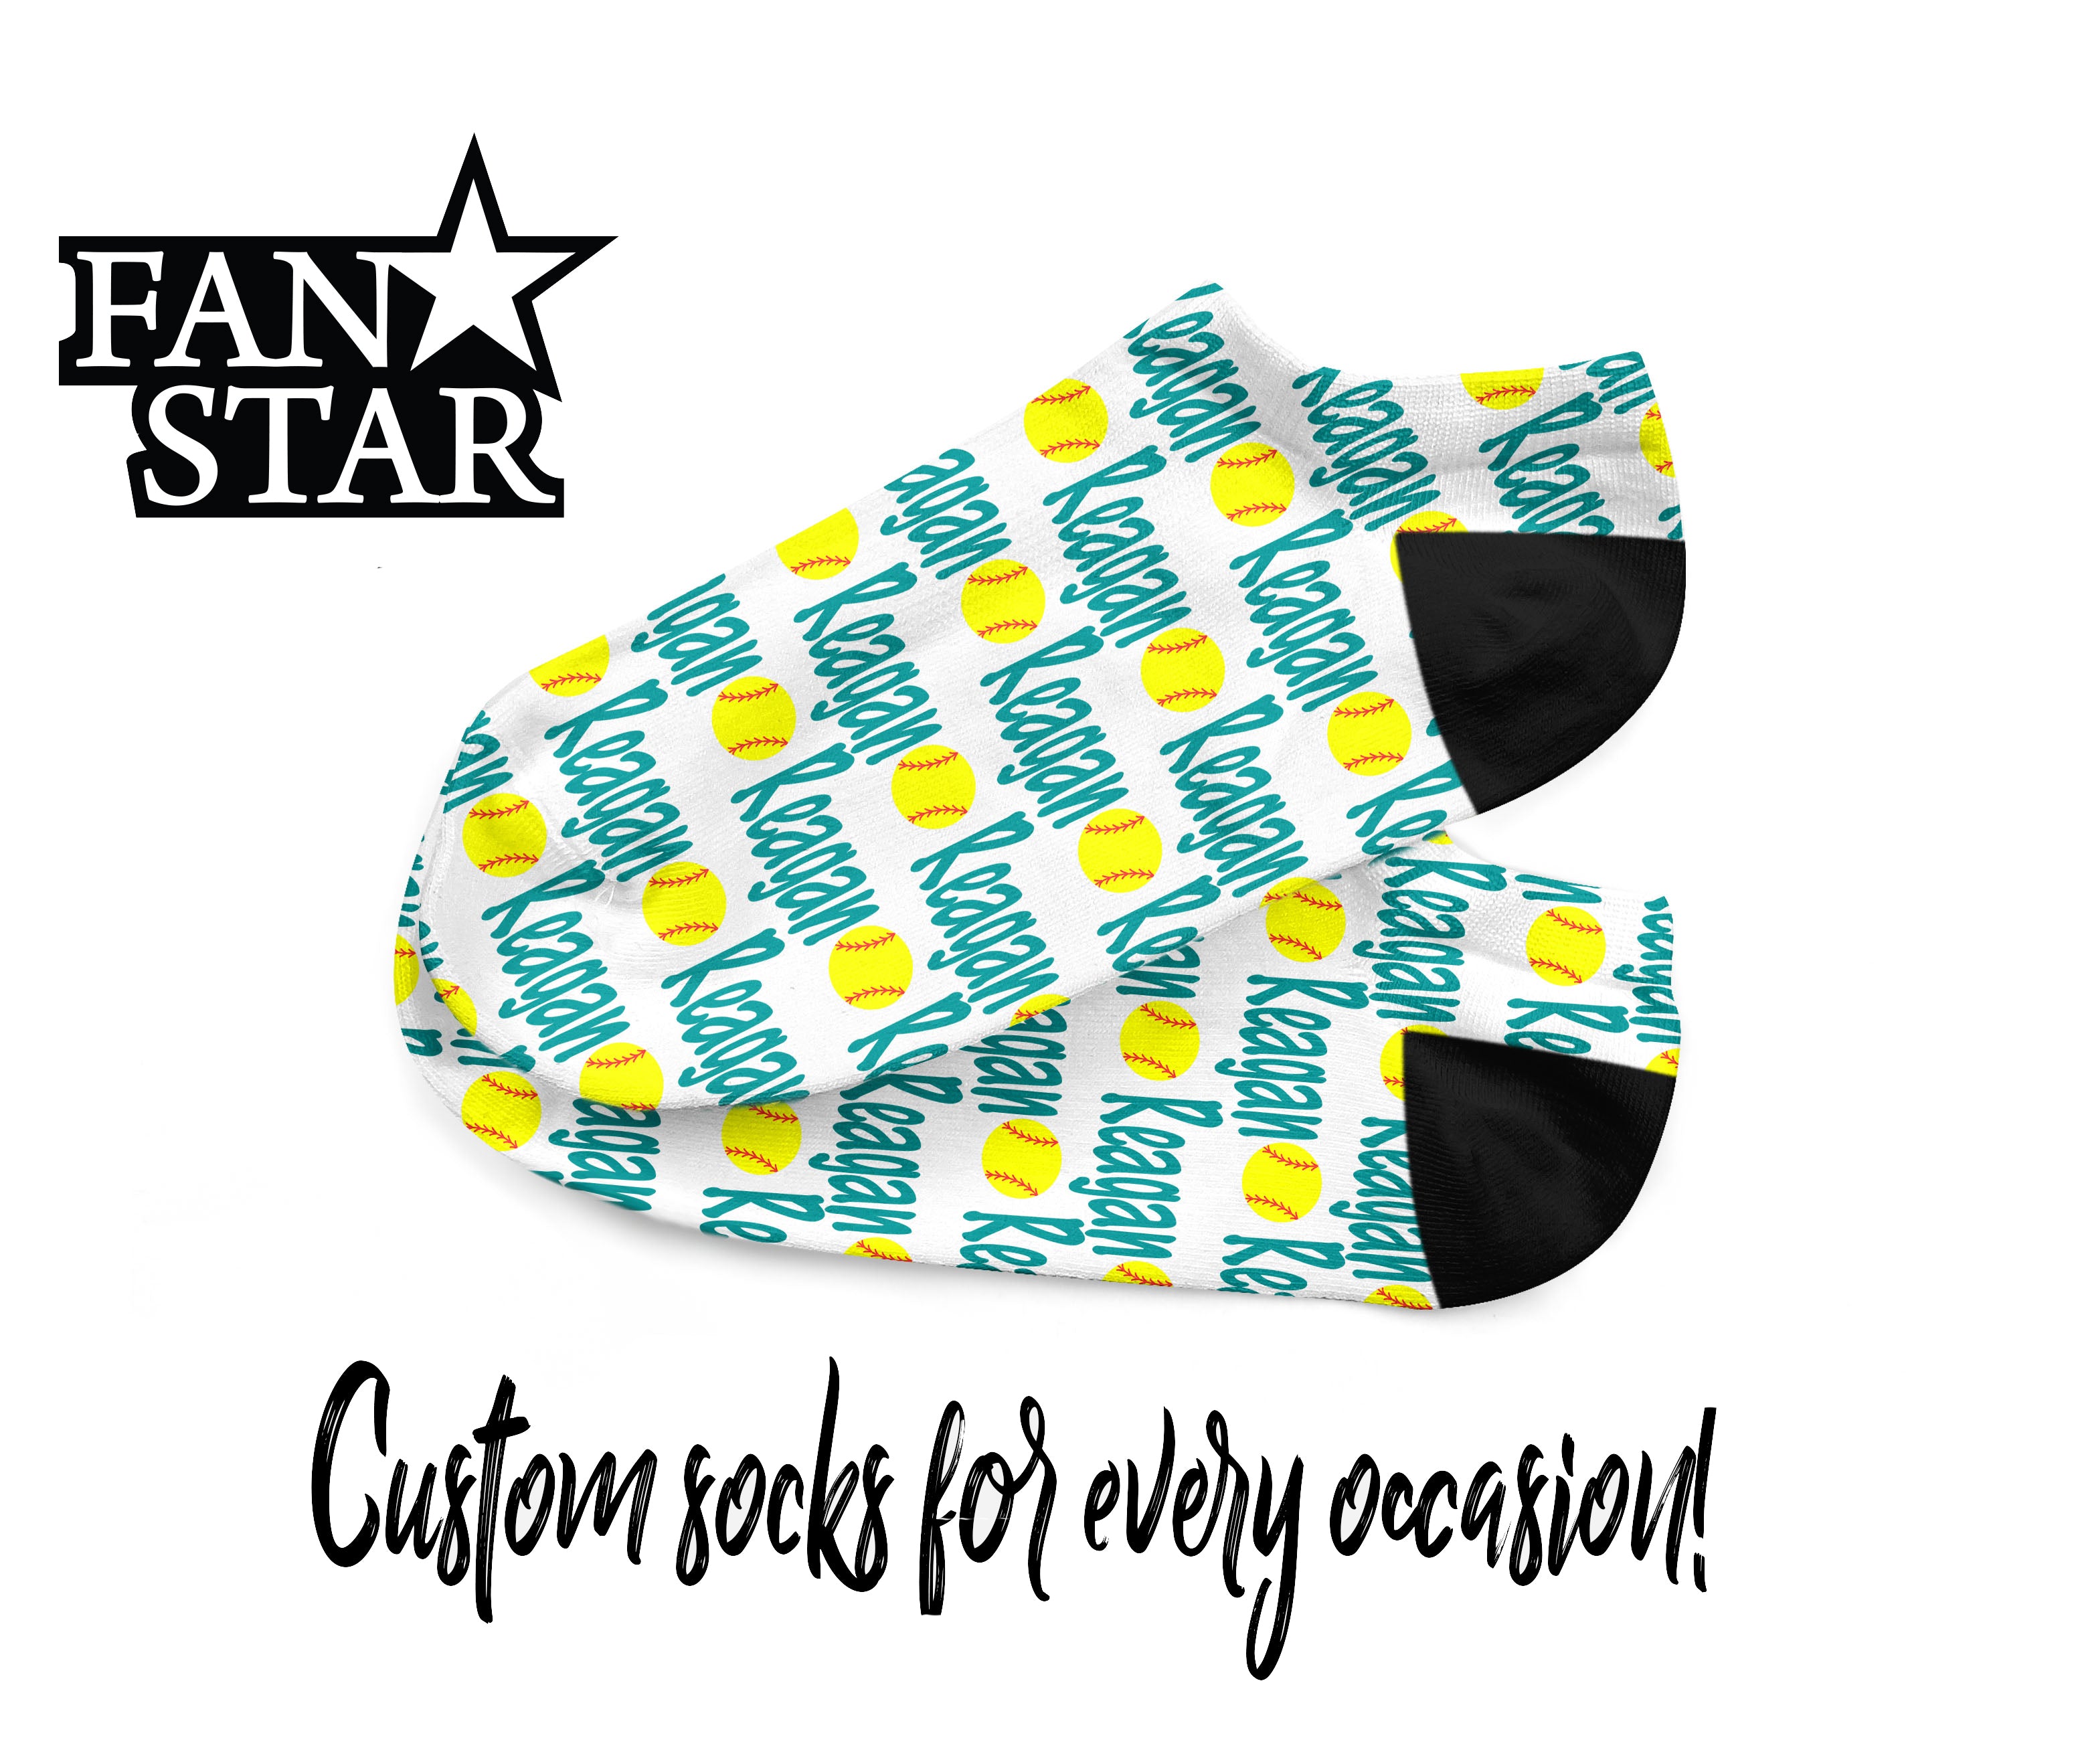 Personalized Custom Softball Ankle Socks - Fits Sizes 4-10 - Great Team Gift